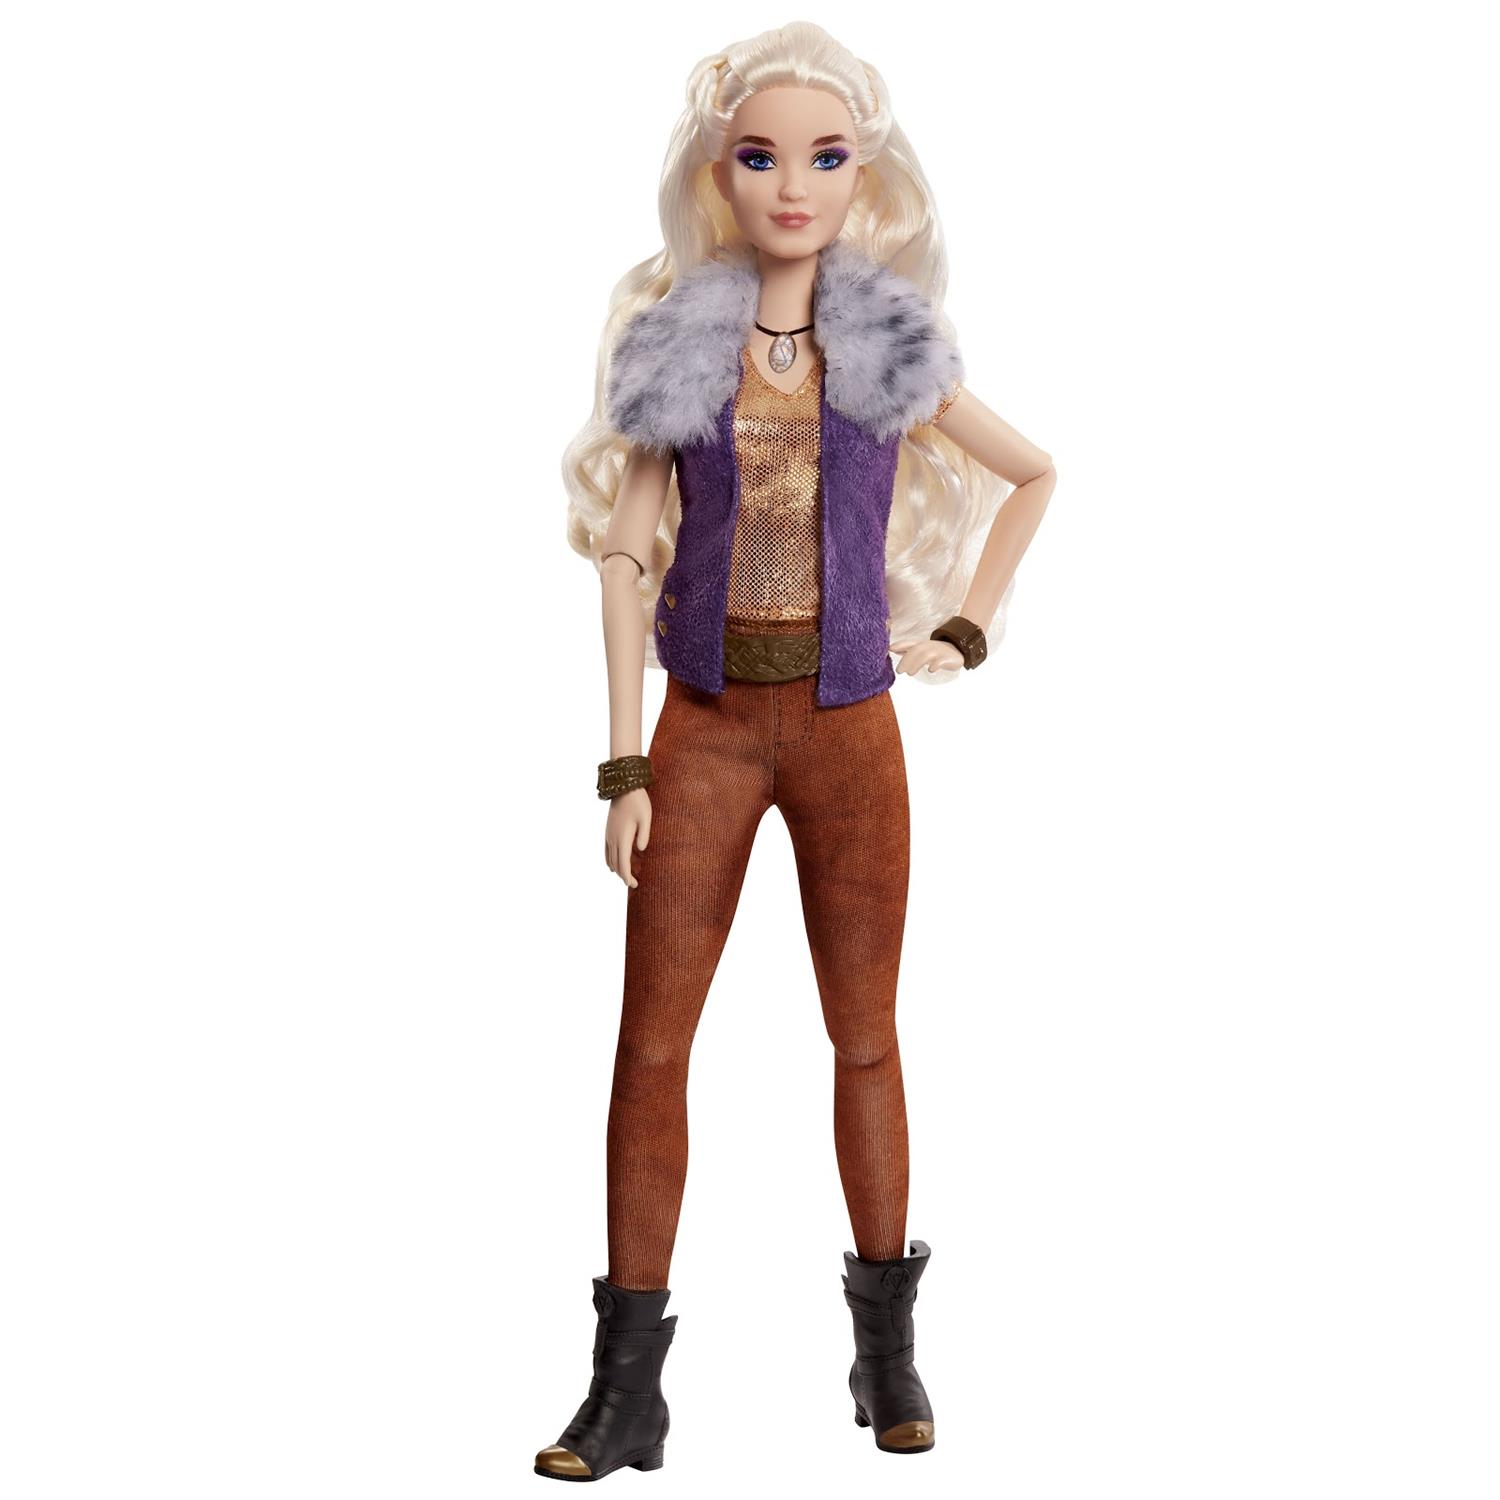 Addison singing doll from Disney’s Zombies 2 includes deluxe details like e...